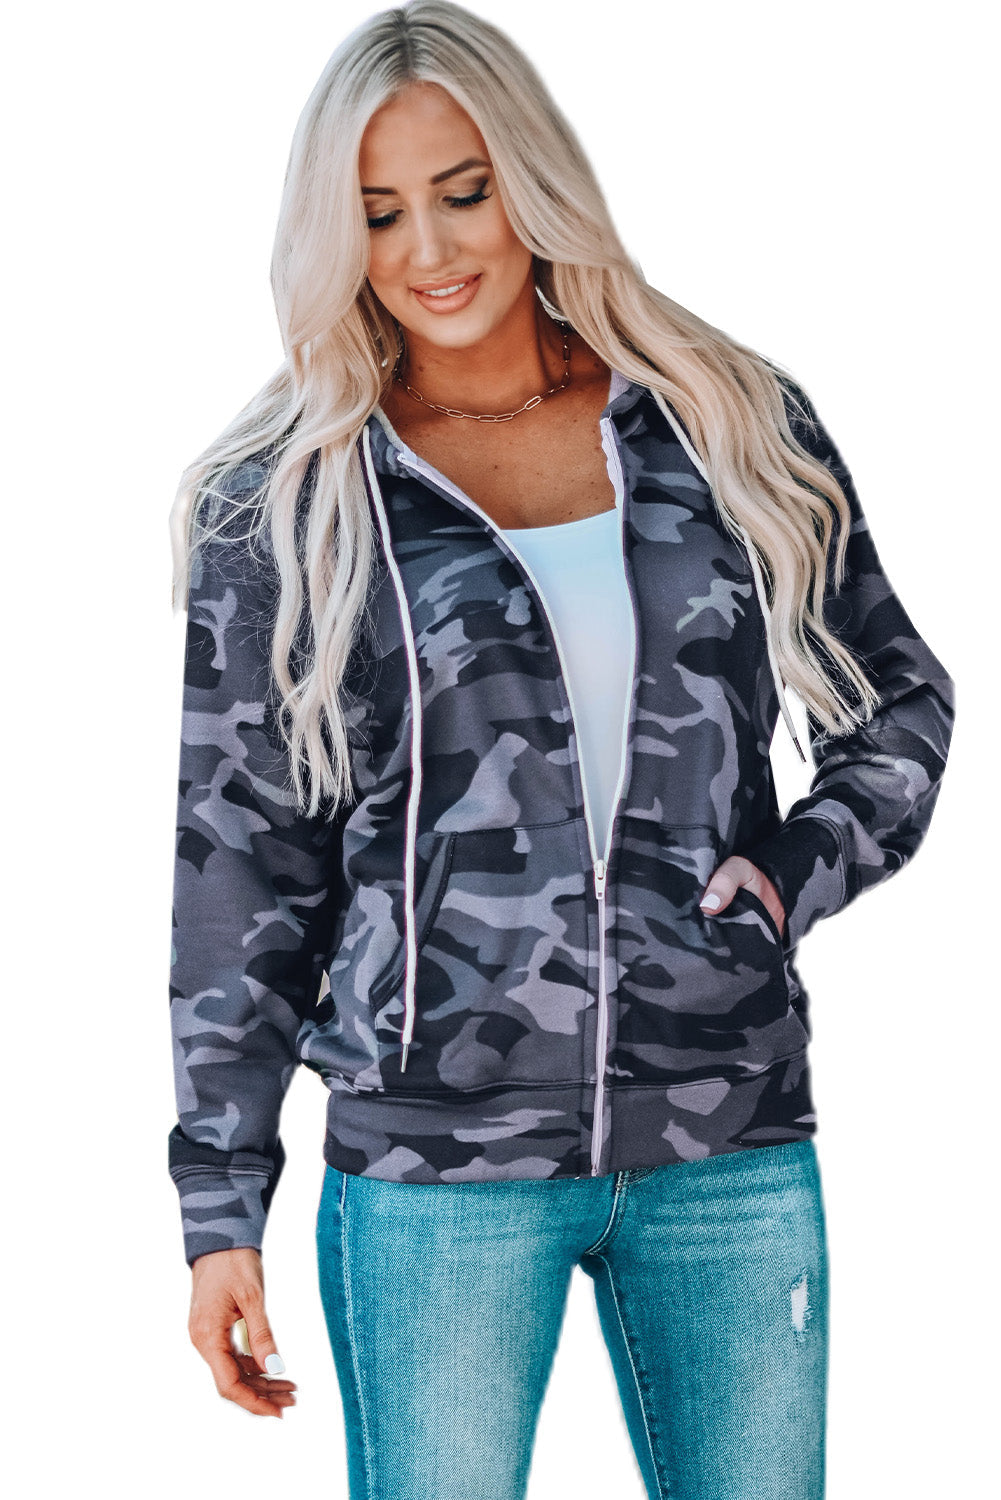 Black Camo Print Zip-up Hooded Coat with Pockets